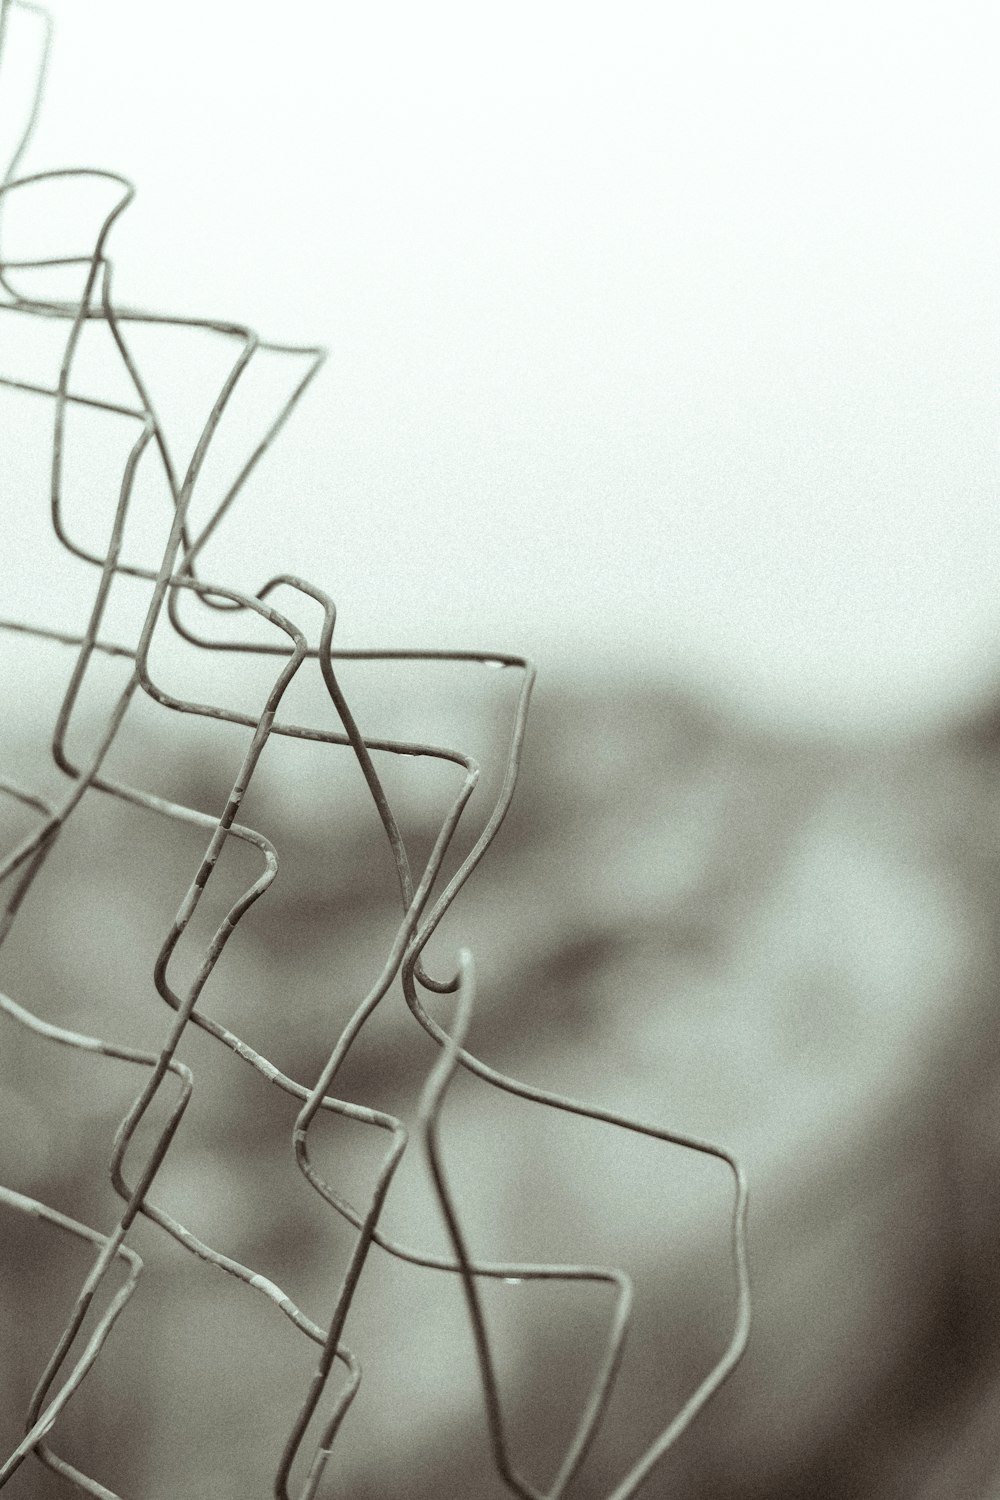 a black and white photo of a wire fence